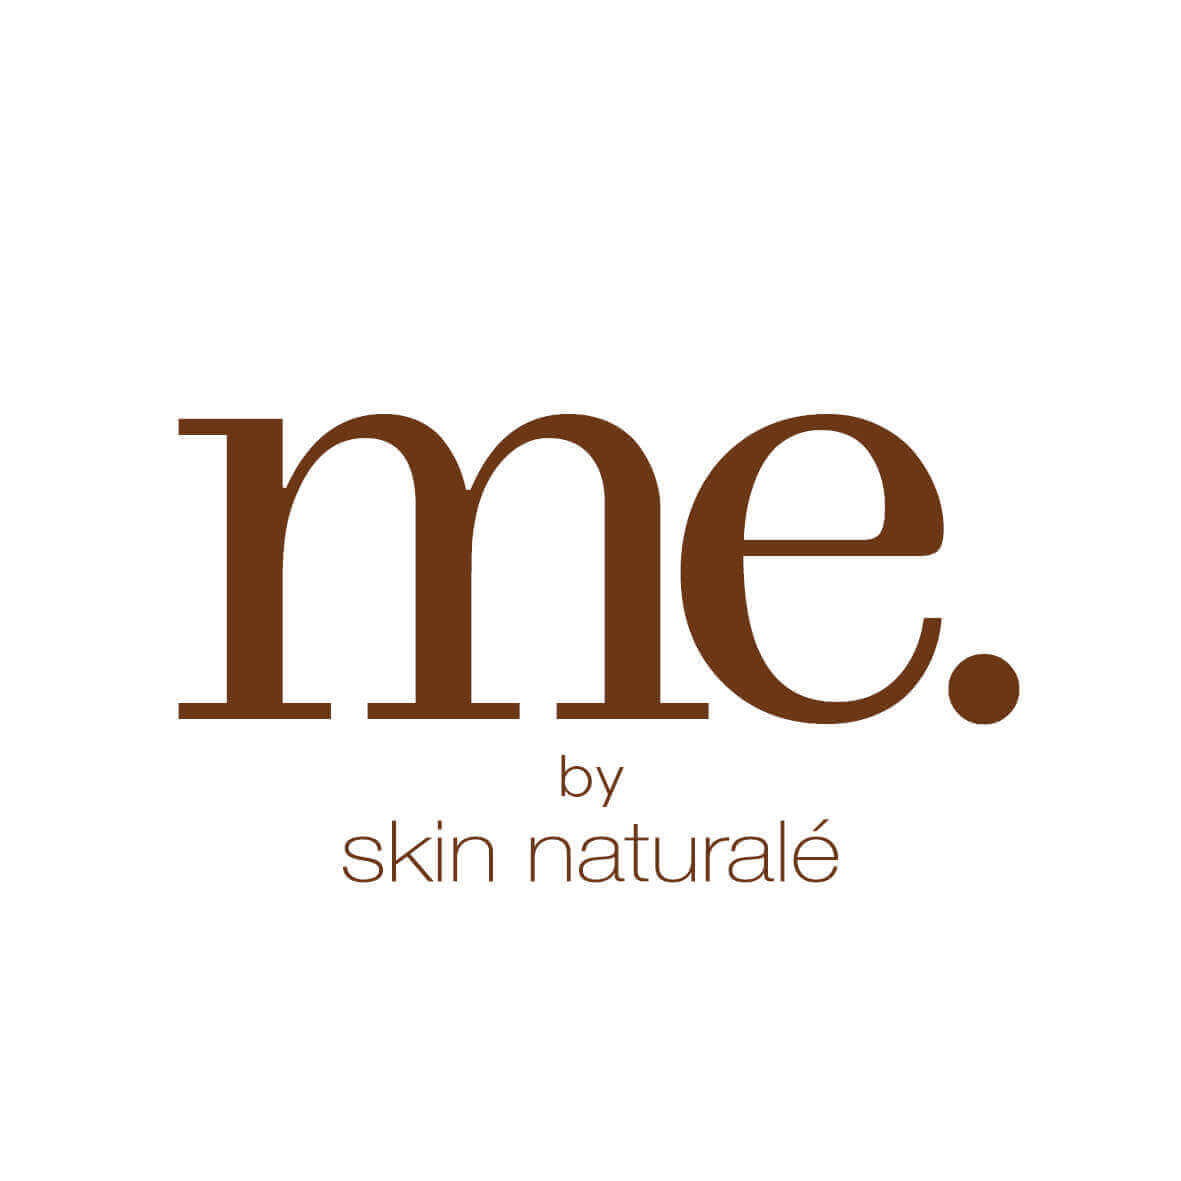 me. logo - By Skin Naturale